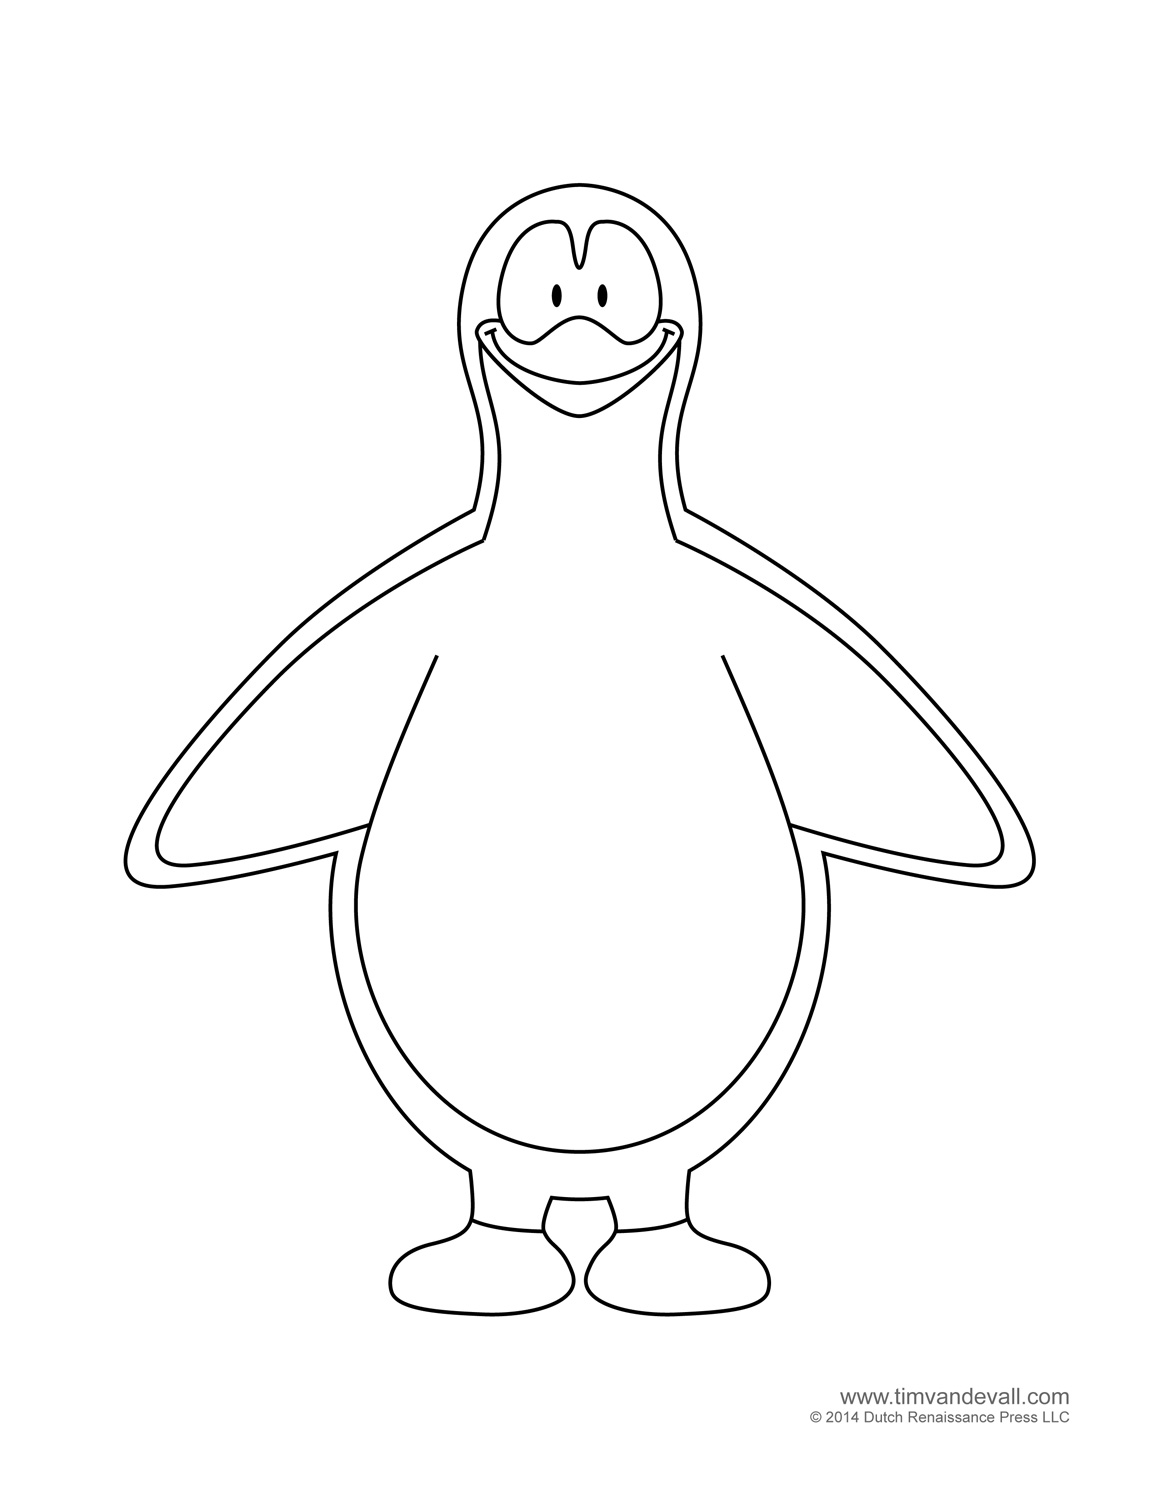 Penguin Template Coloring Pages Clipart Pictures and Crafts